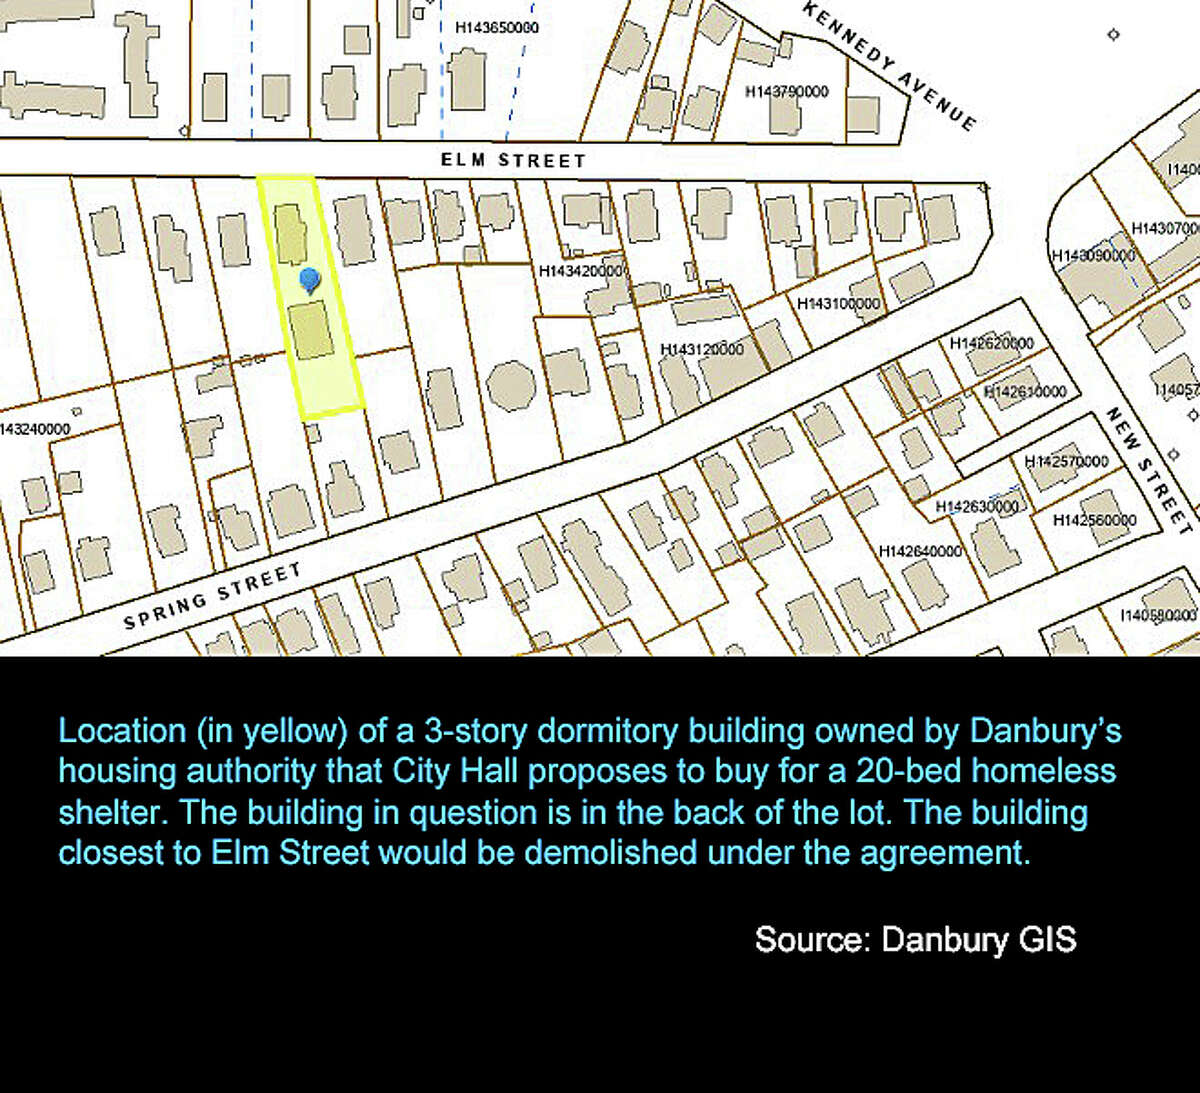 Location of 3-story dormitory building in Danbury owned by the city's housing authority that would be bought for use as a 20-bed shelter for the homeless under a complicated multi-party agreement the City Council must approve.   